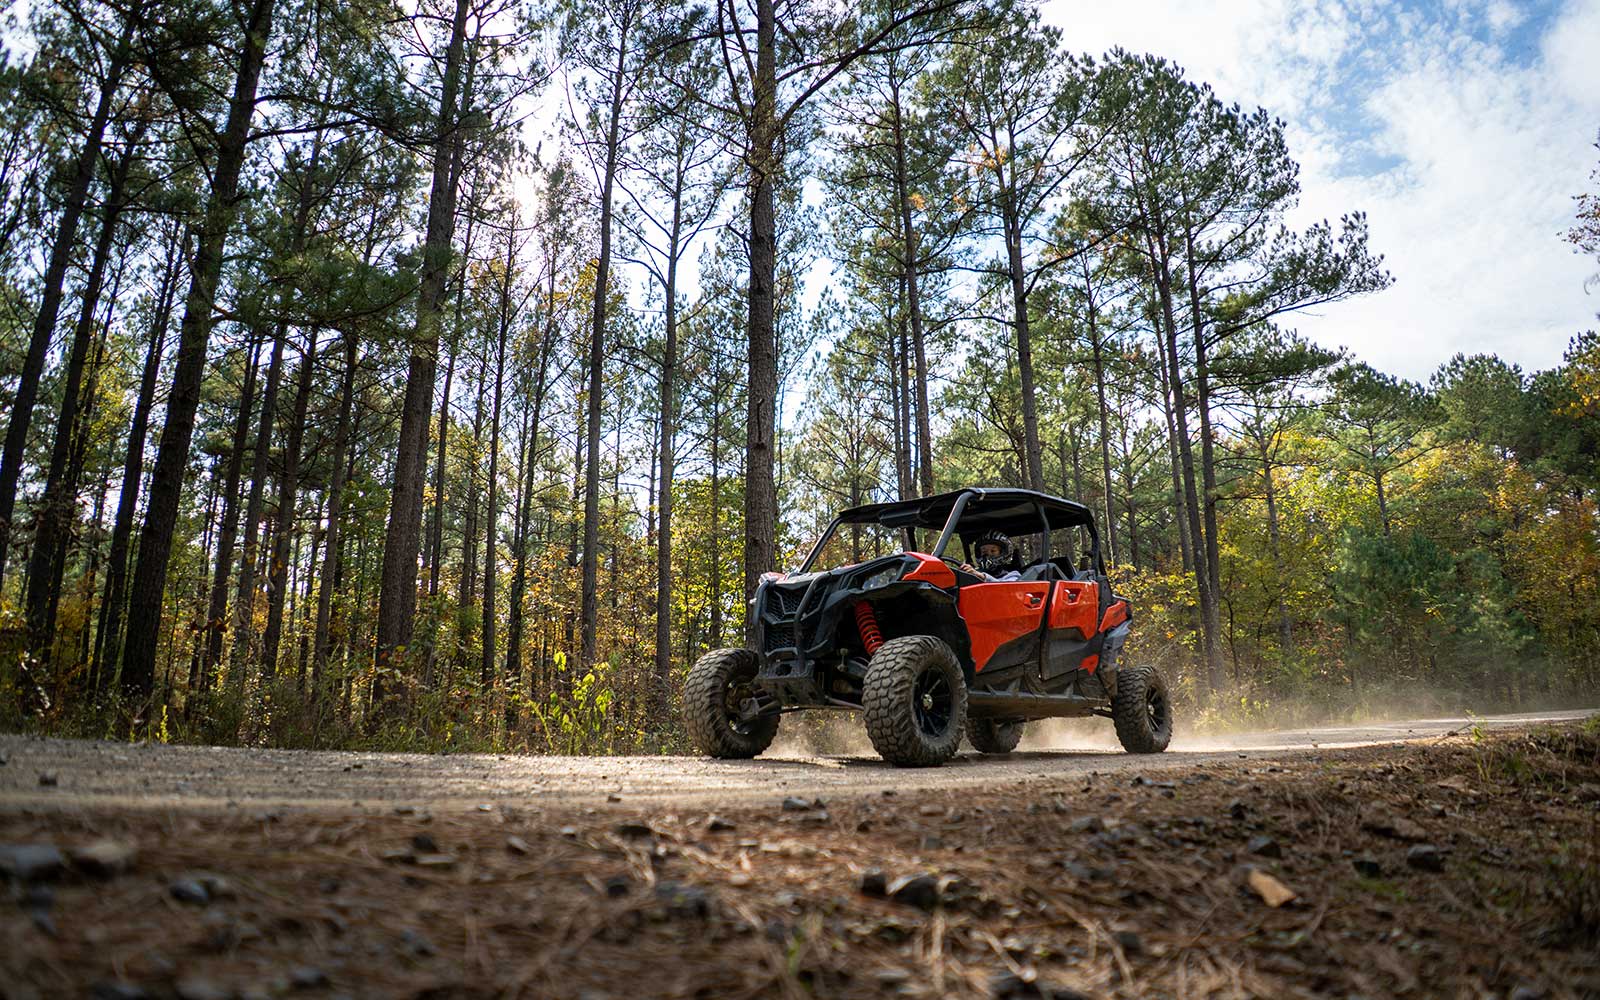 33 miles of ATV trails in the Ouachita National Forest. ATV rentals are available. Please abide by ATV rules and regulations.